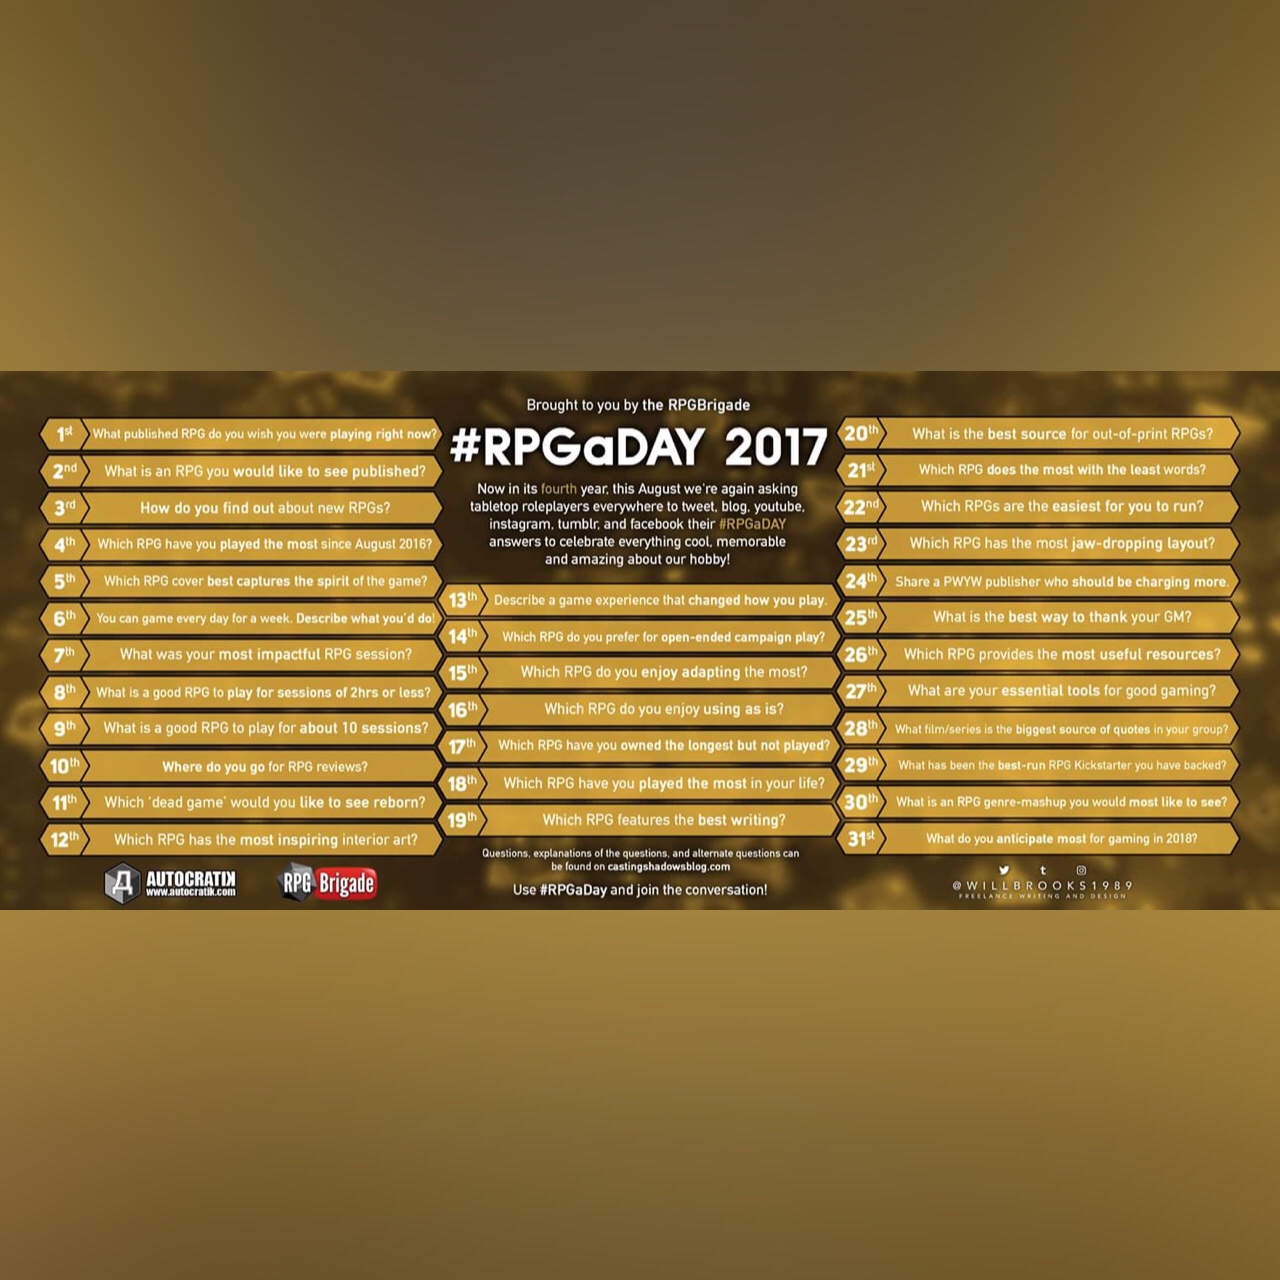 RPGaDAY 2017 August 22nd which RPGs are the easiest for you to run?